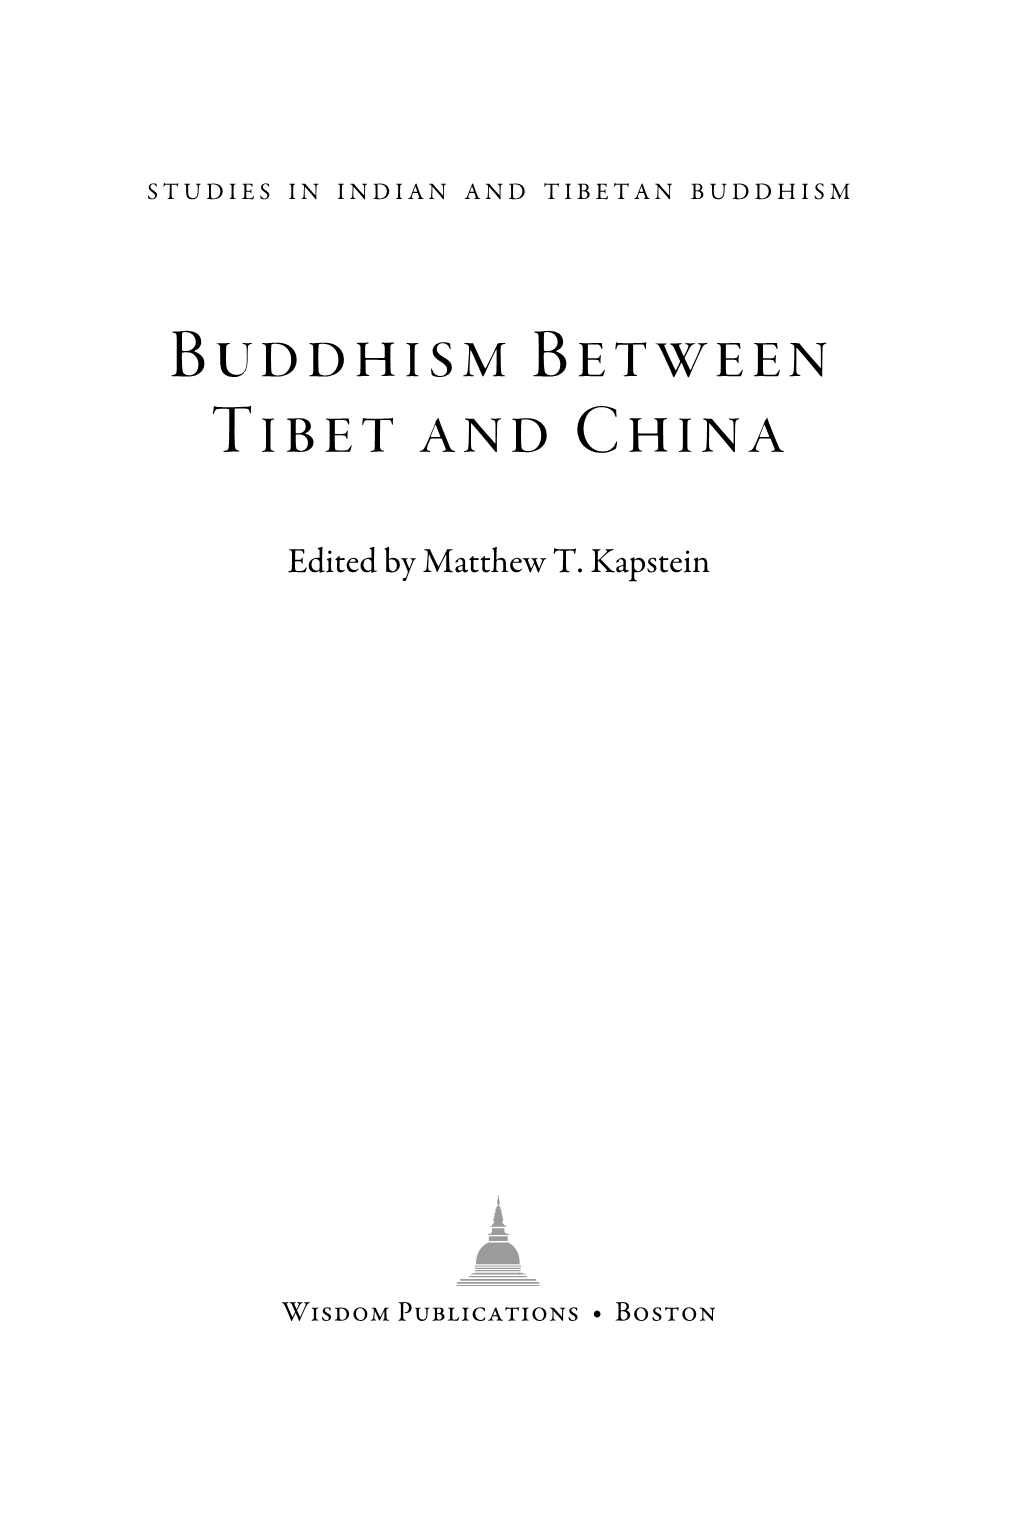 Translating Buddhism from Tibetan to Chinese in Early-Twentieth-Century China (0340–0360) Gray Tuttle 7>0